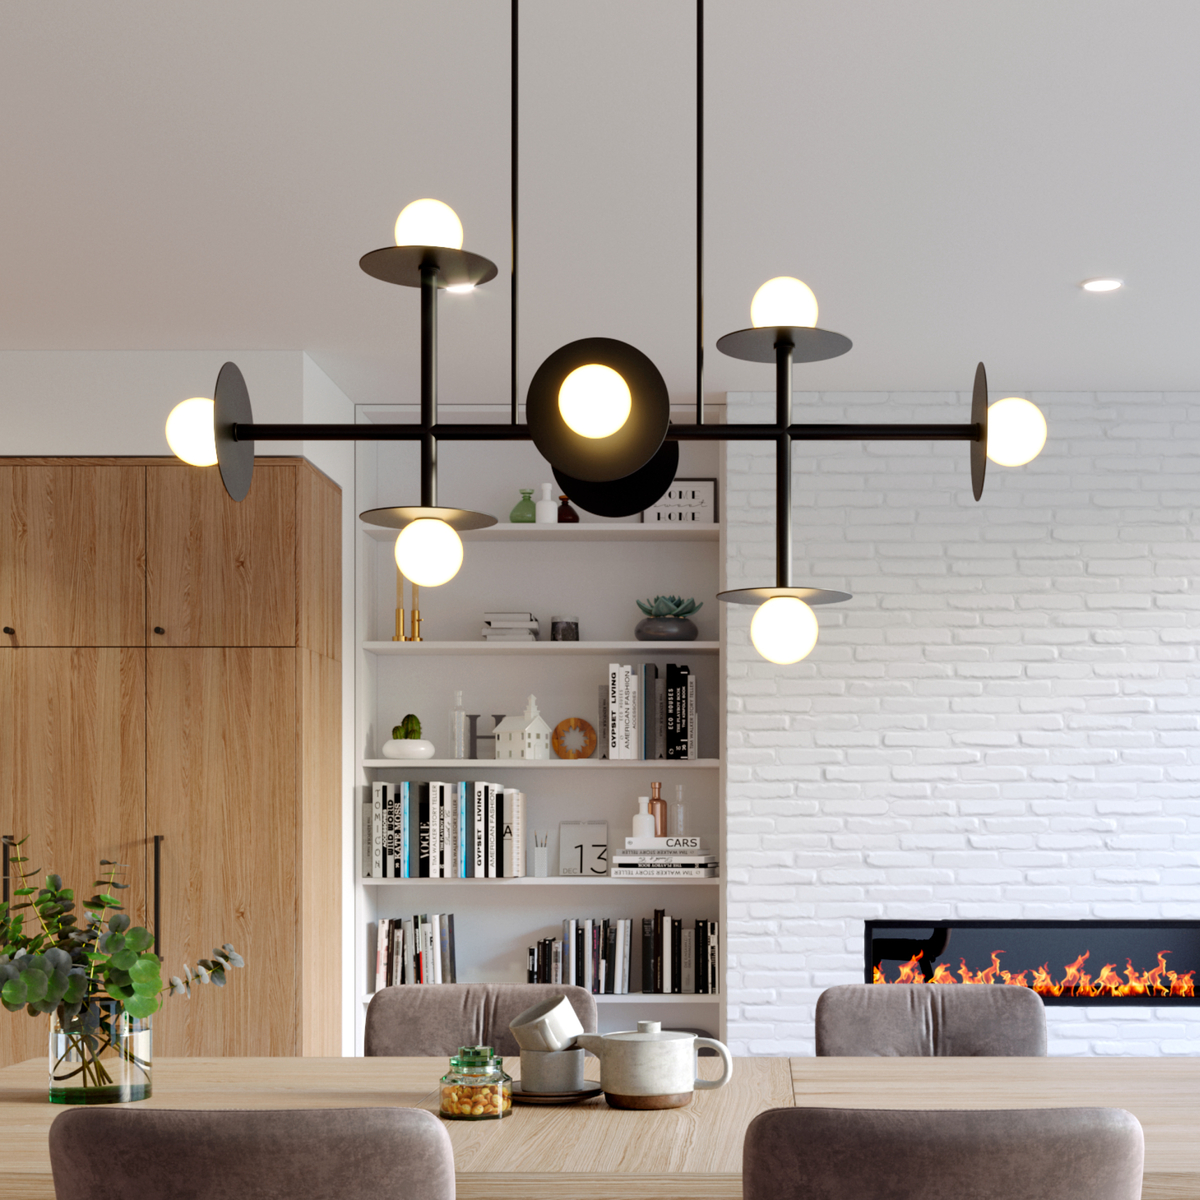 Black chandelier in white brick dining area with bookshelf